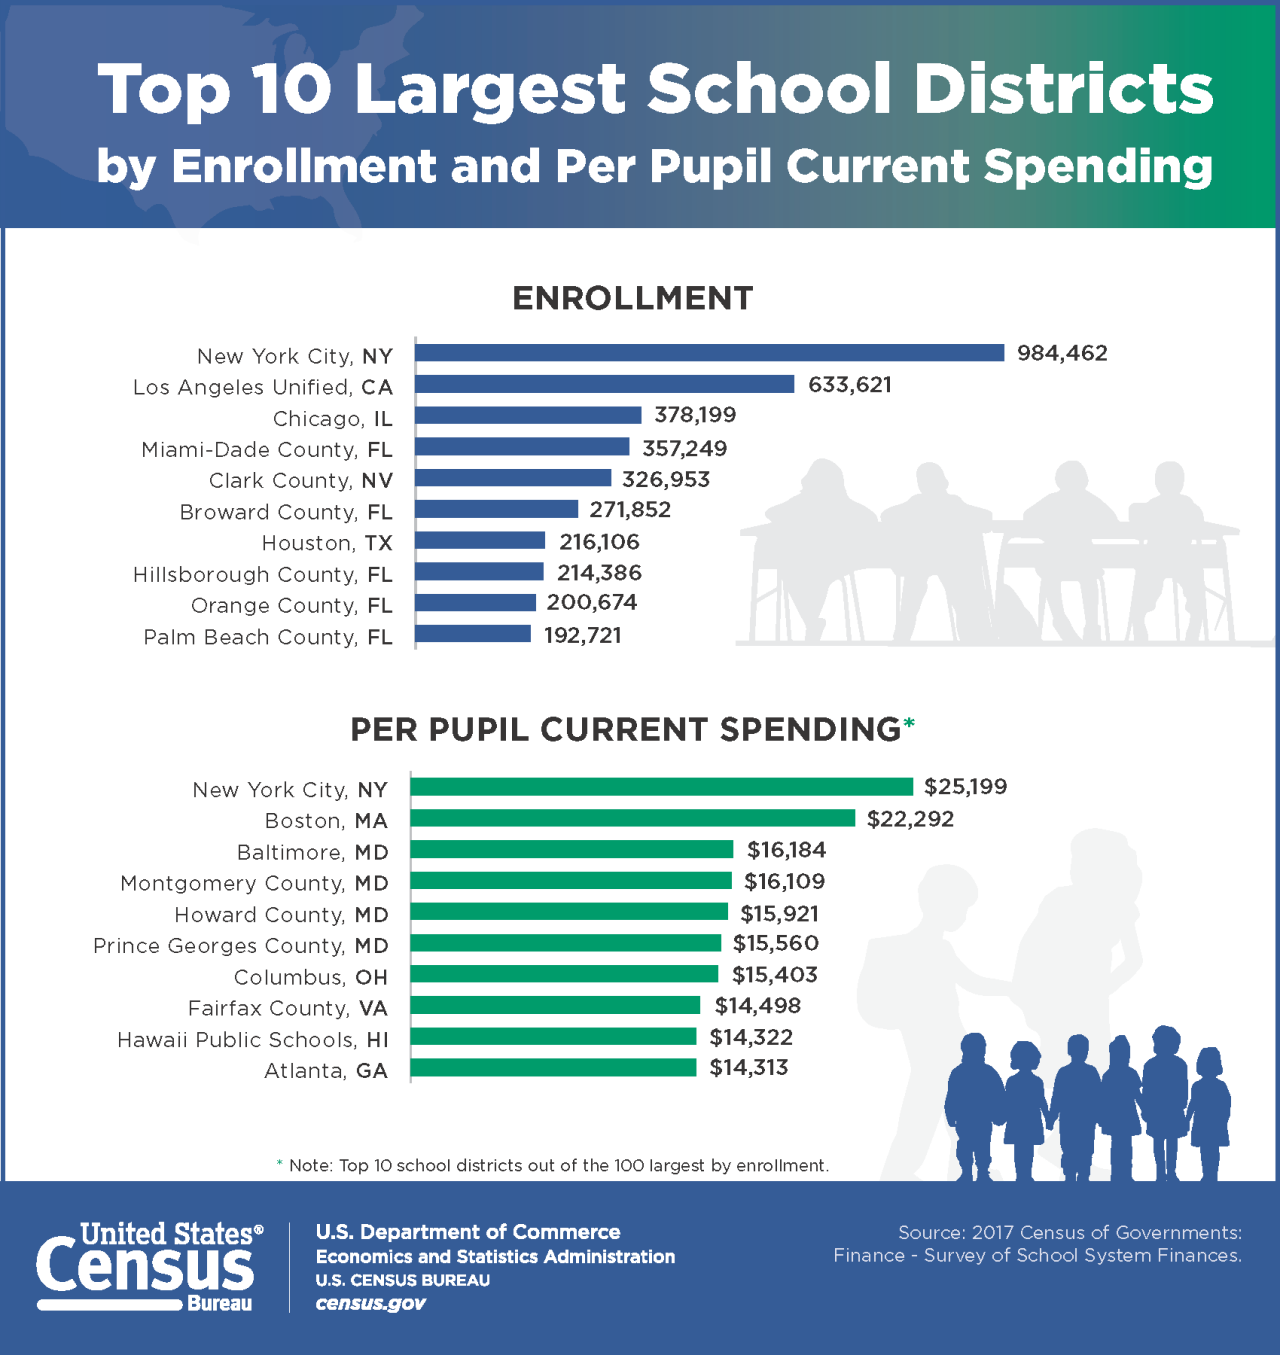 Top 10 Largest School Districts by Enrollment and Per Pupil Current Spending